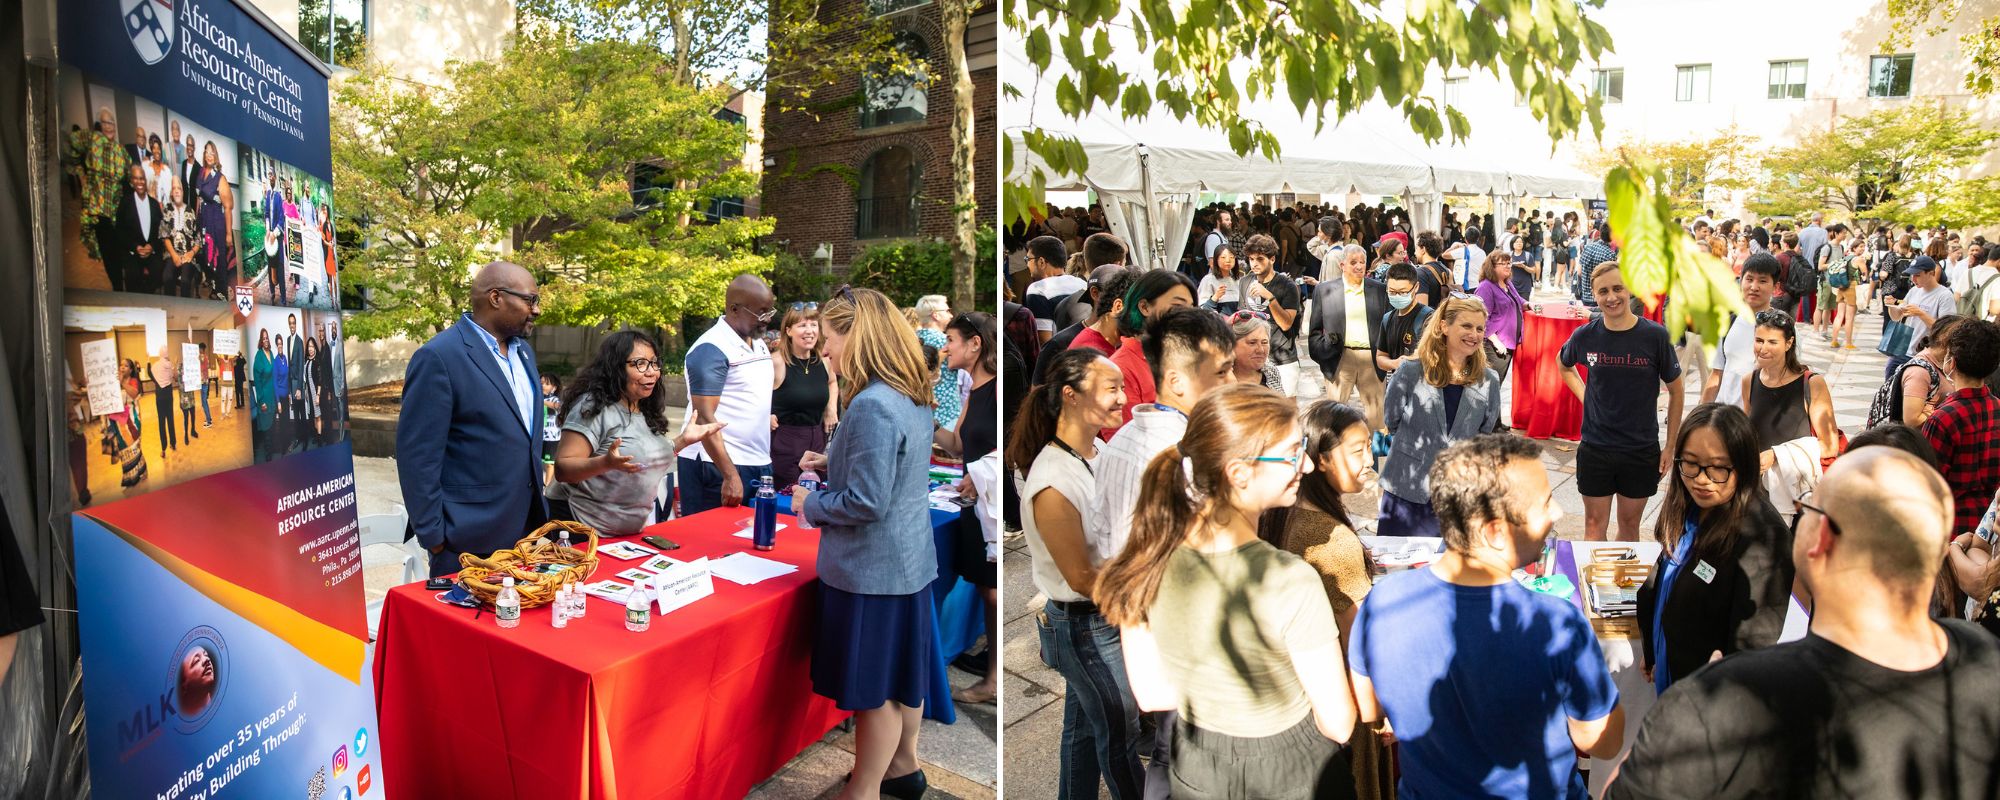 New graduate and professional students come together for annual resource fair